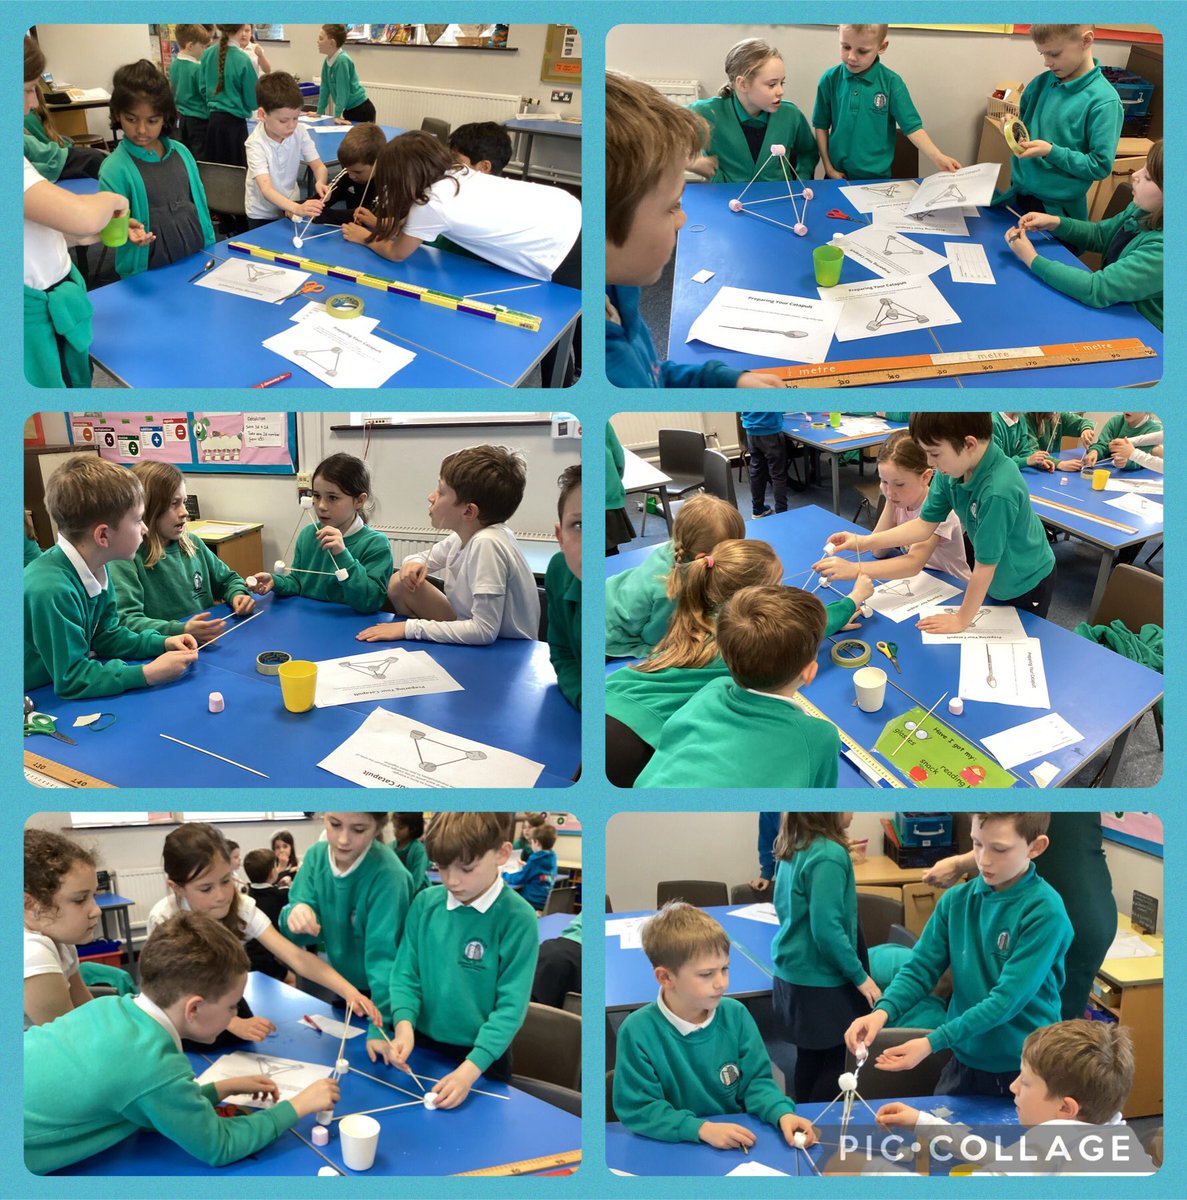 Year 3 have shown that they are ambitious, capable learners and have constructed marshmallow catapults. They discussed how to make sure it was kept a fair test and measured the distance of the payload. We also spoke about which forces would also affect the distance.